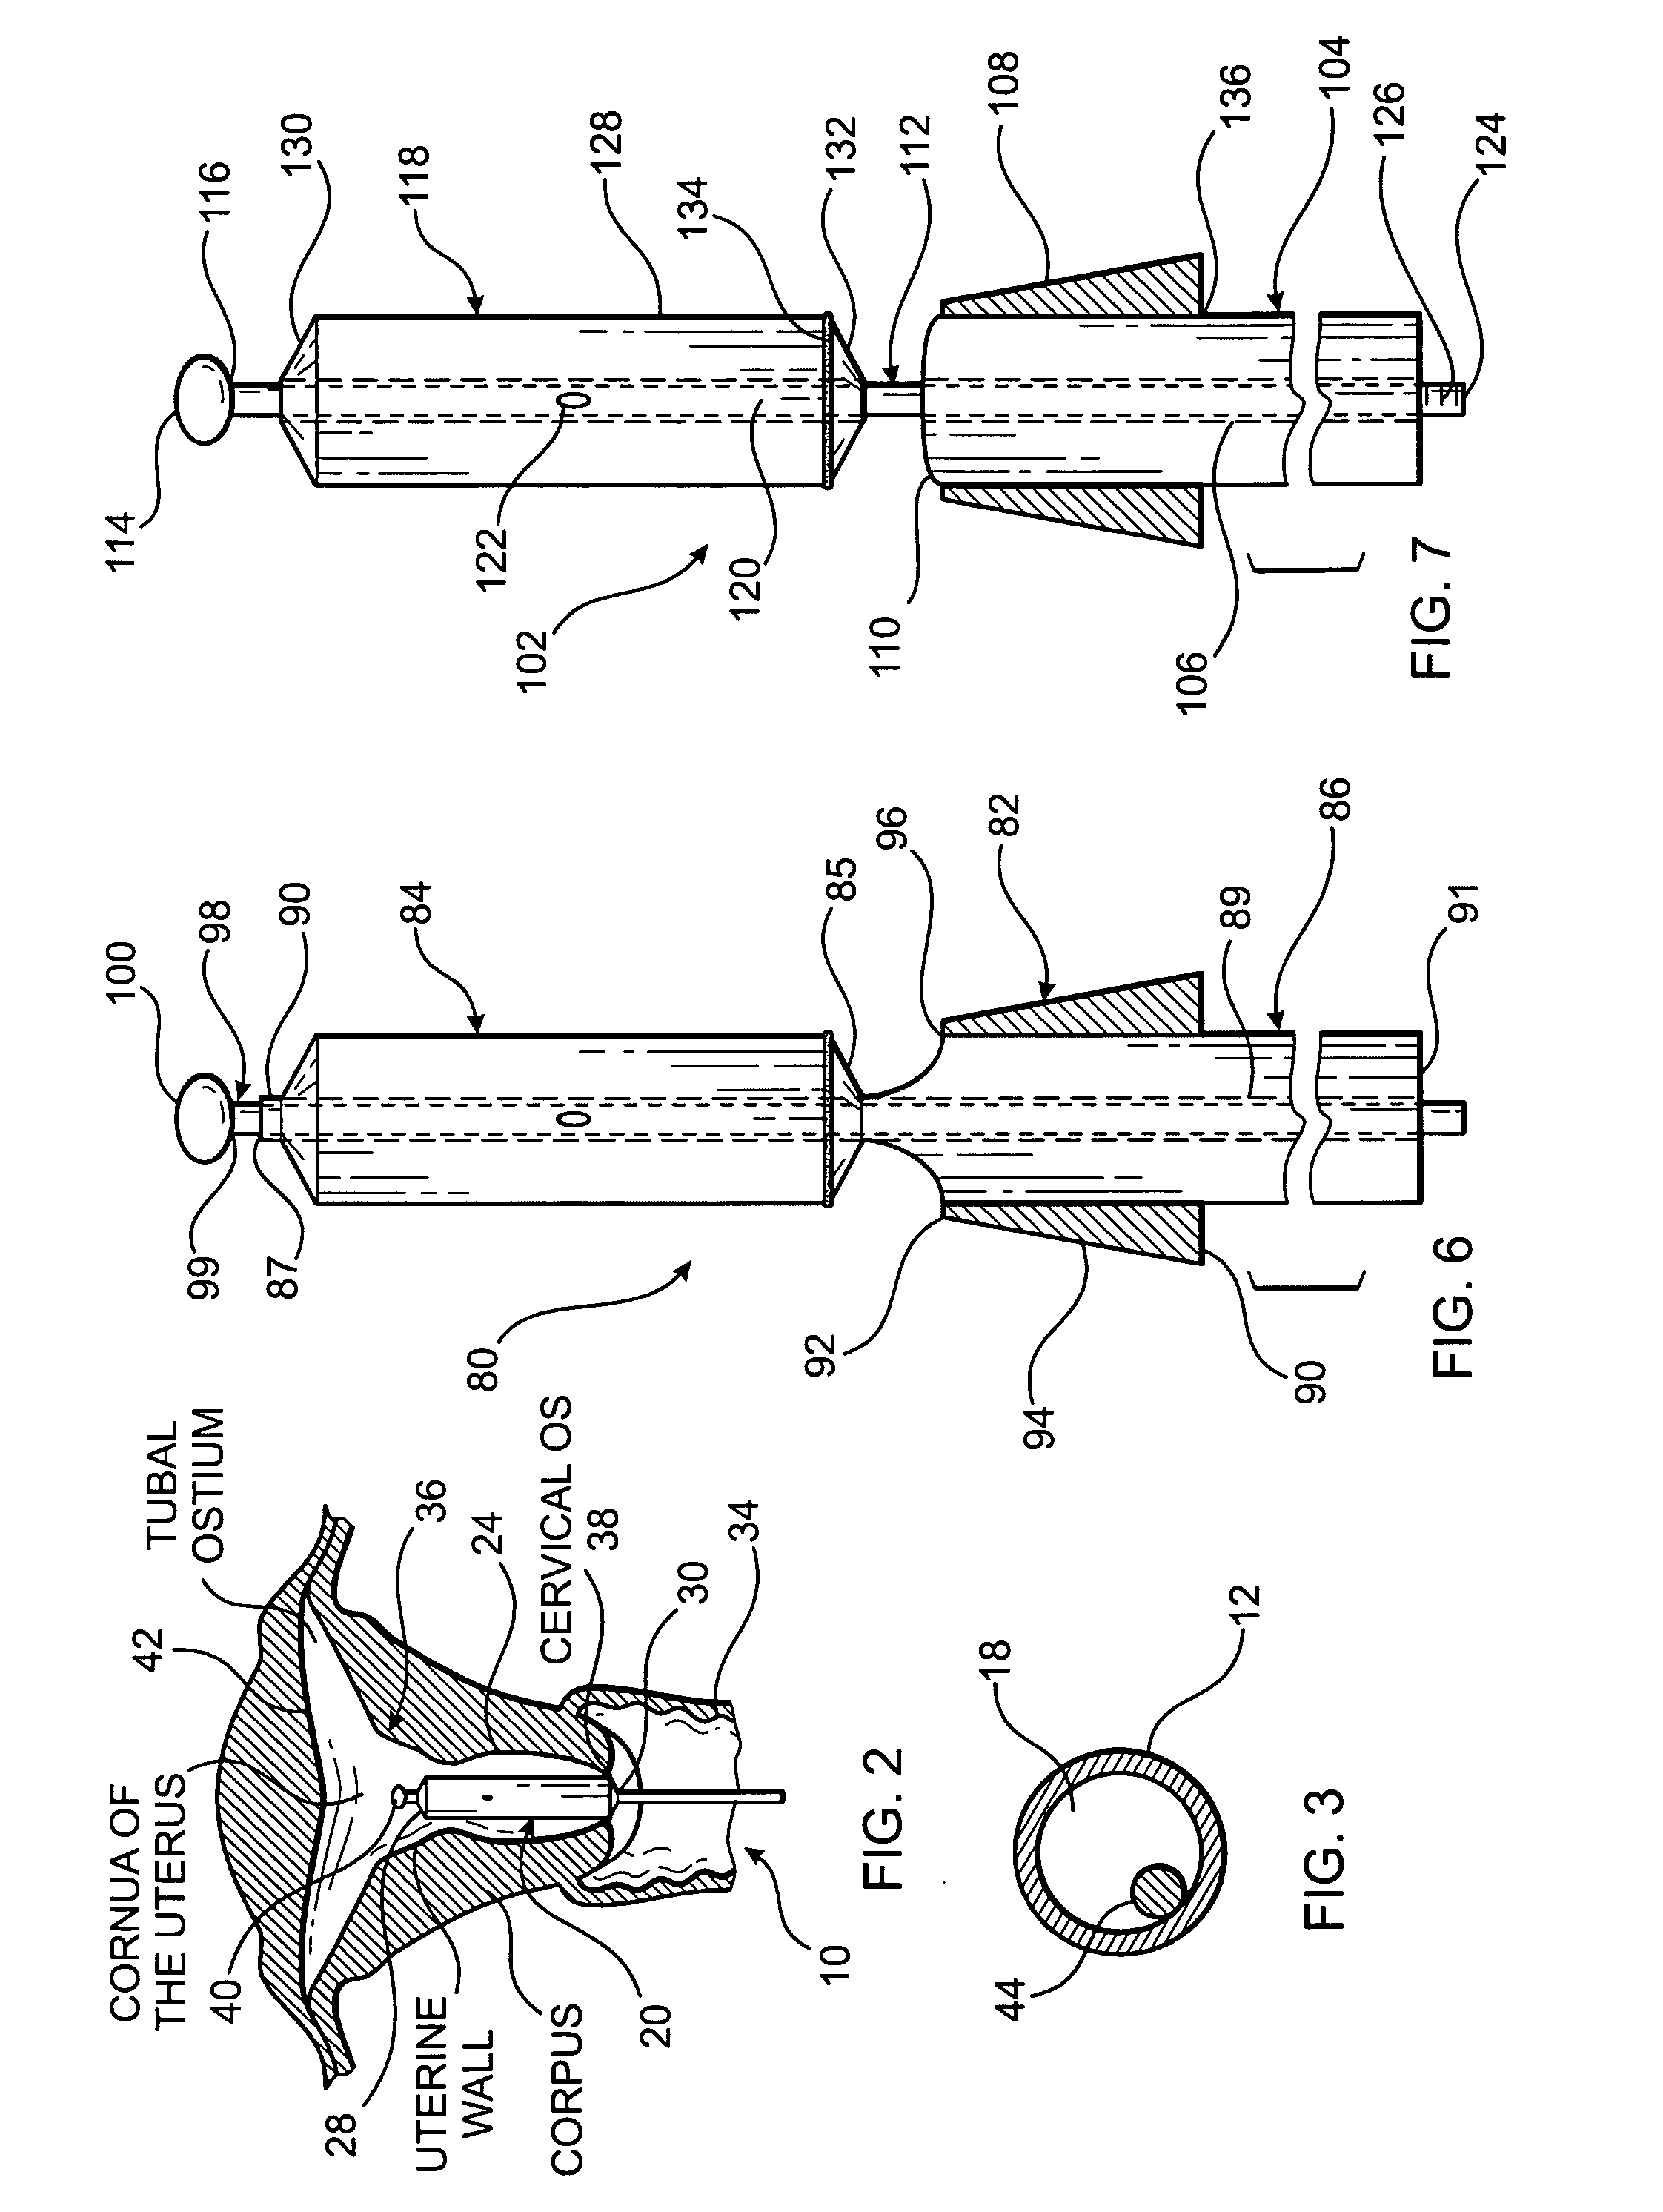 Cervical dilator and methods of use